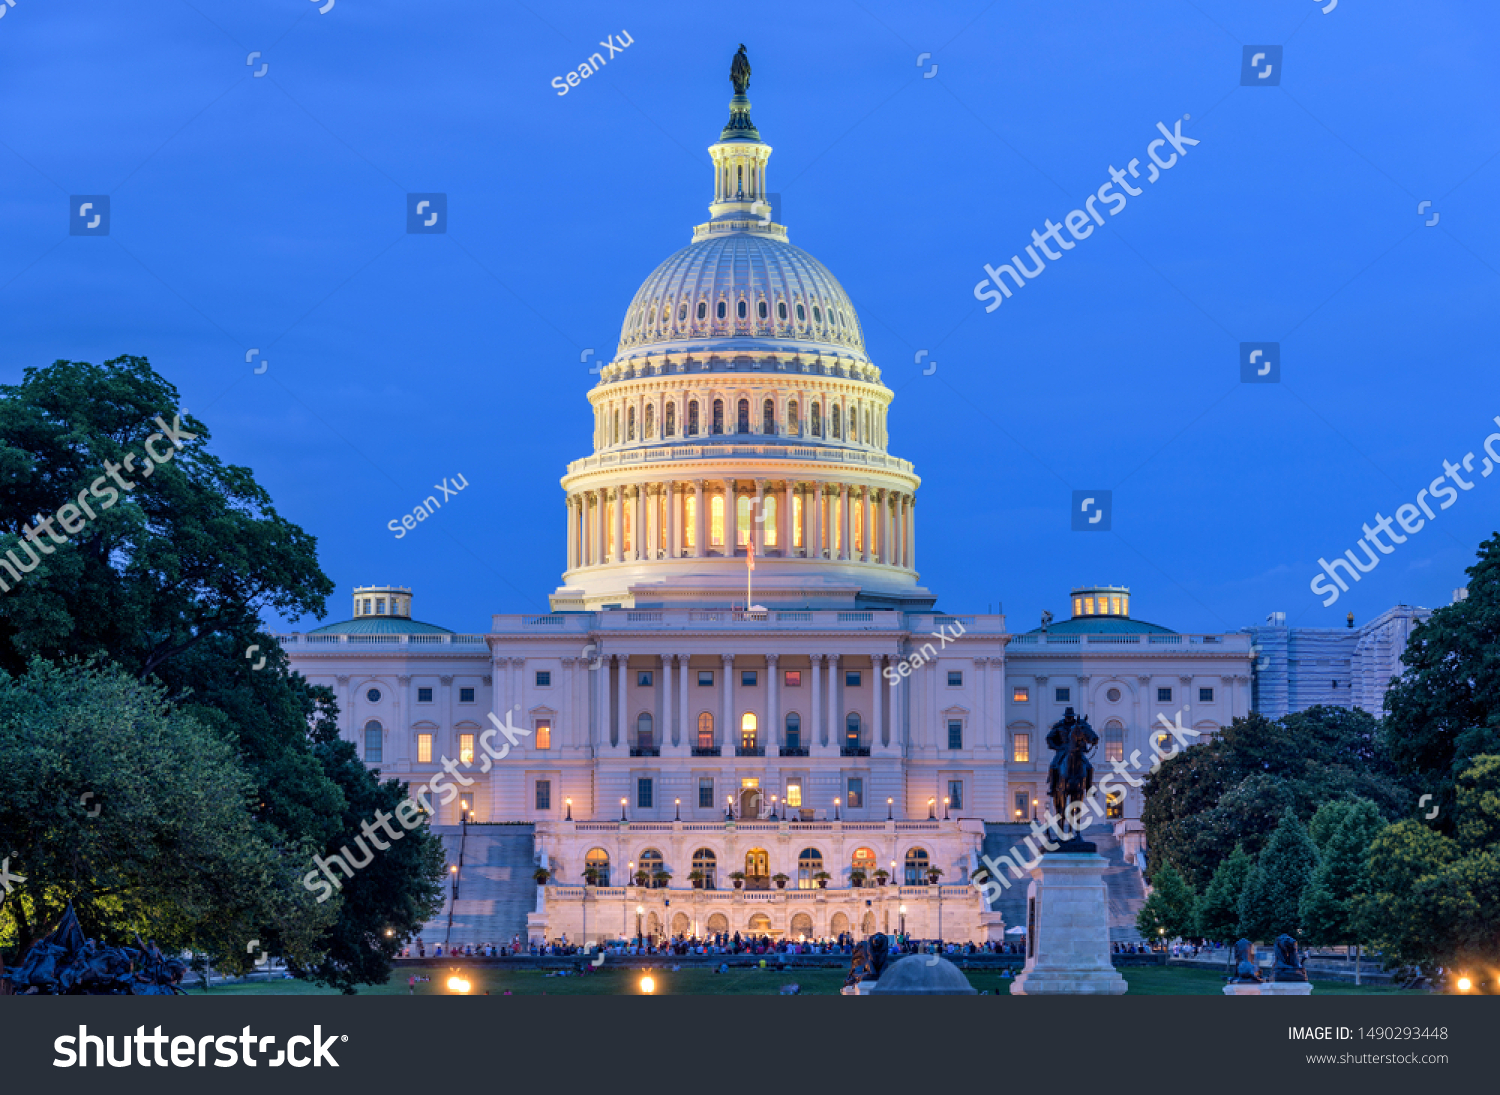 Summer Night at Capitol Hill - A dusk view of west-side of U.S. Capitol Building, as a small crowd gathering around a summer concert at front, Washington, D.C., USA. No recognizable log or person. #1490293448